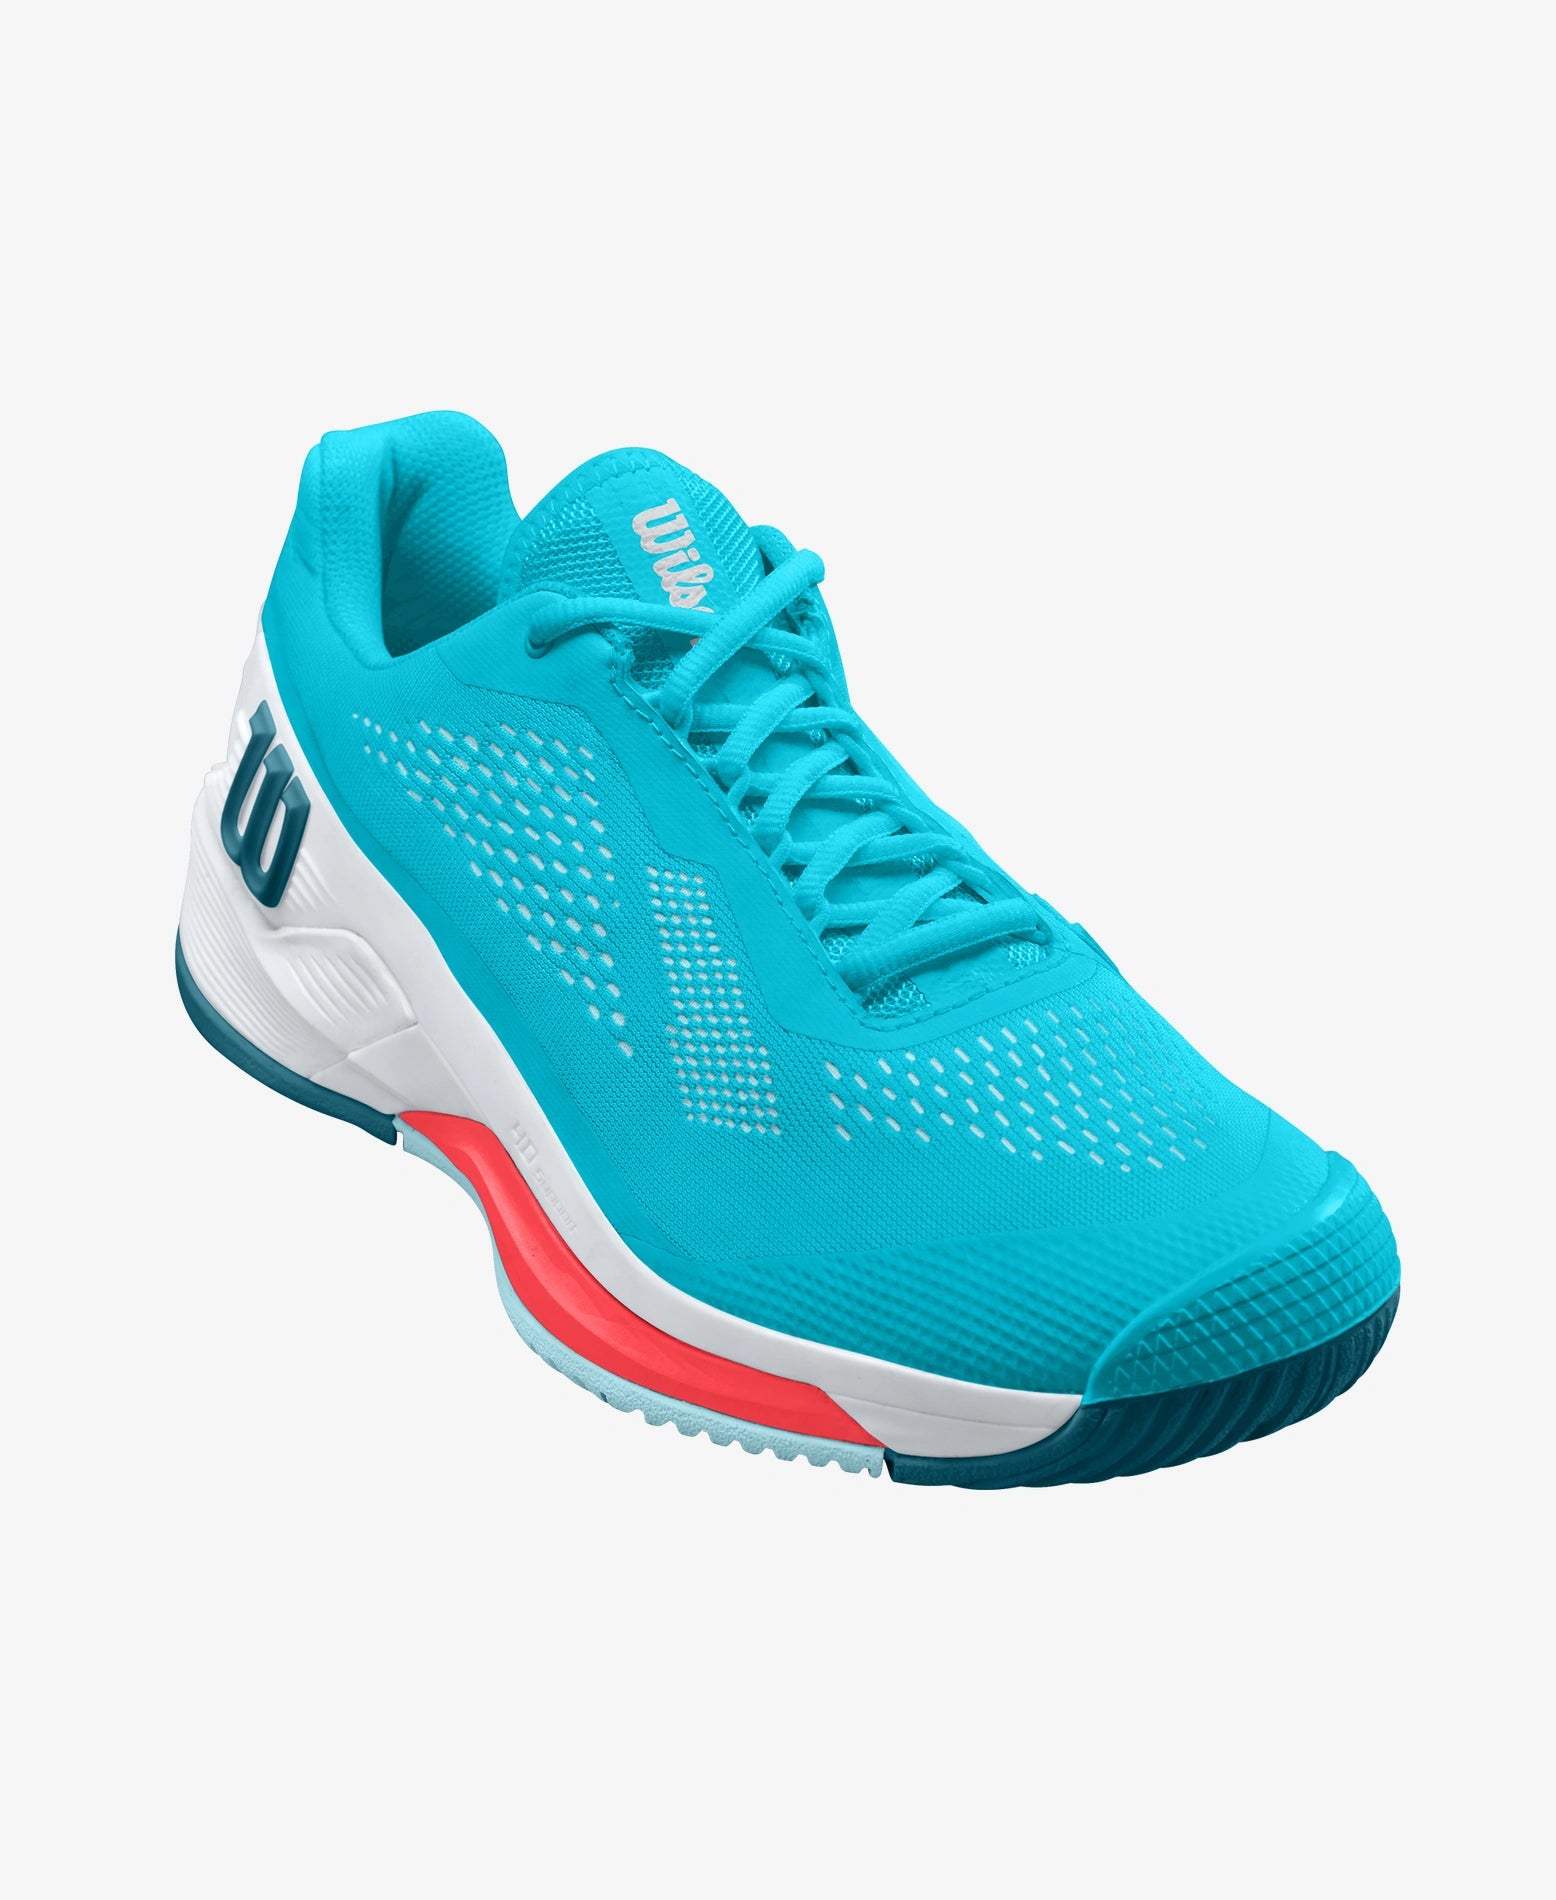 The Wilson Rush Pro 4.0 Womens Tennis Shoe- Scuba Blue / White / Fiery Coral Tn available for sale at GSM Sports.    